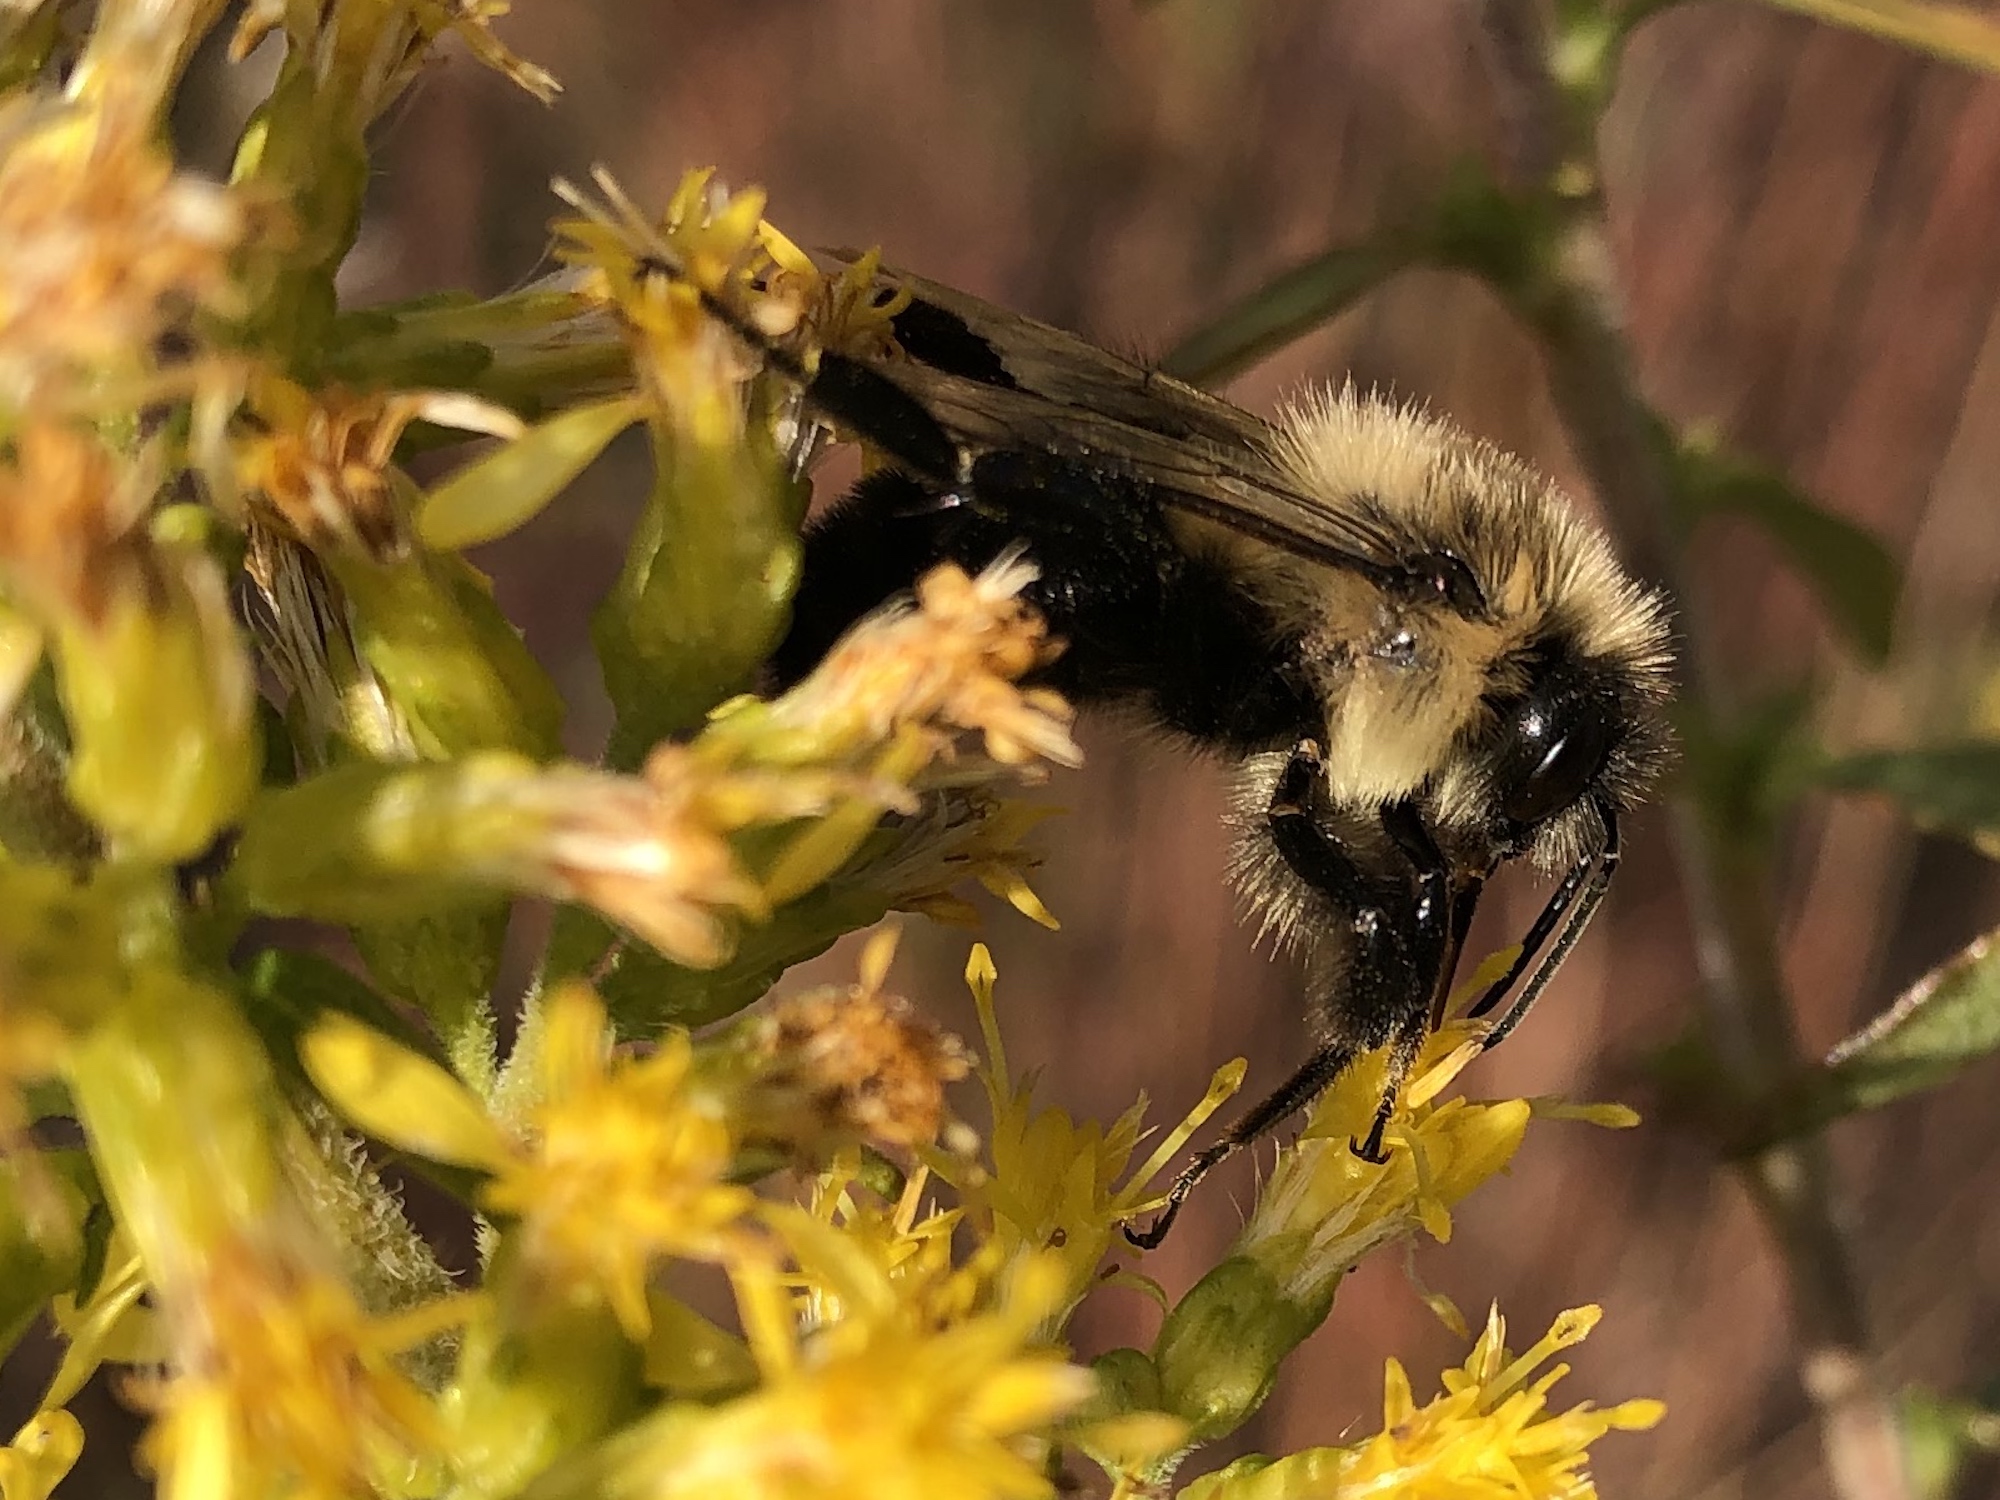 Bumblebee on Showy Goldenrod on October 21, 2020.